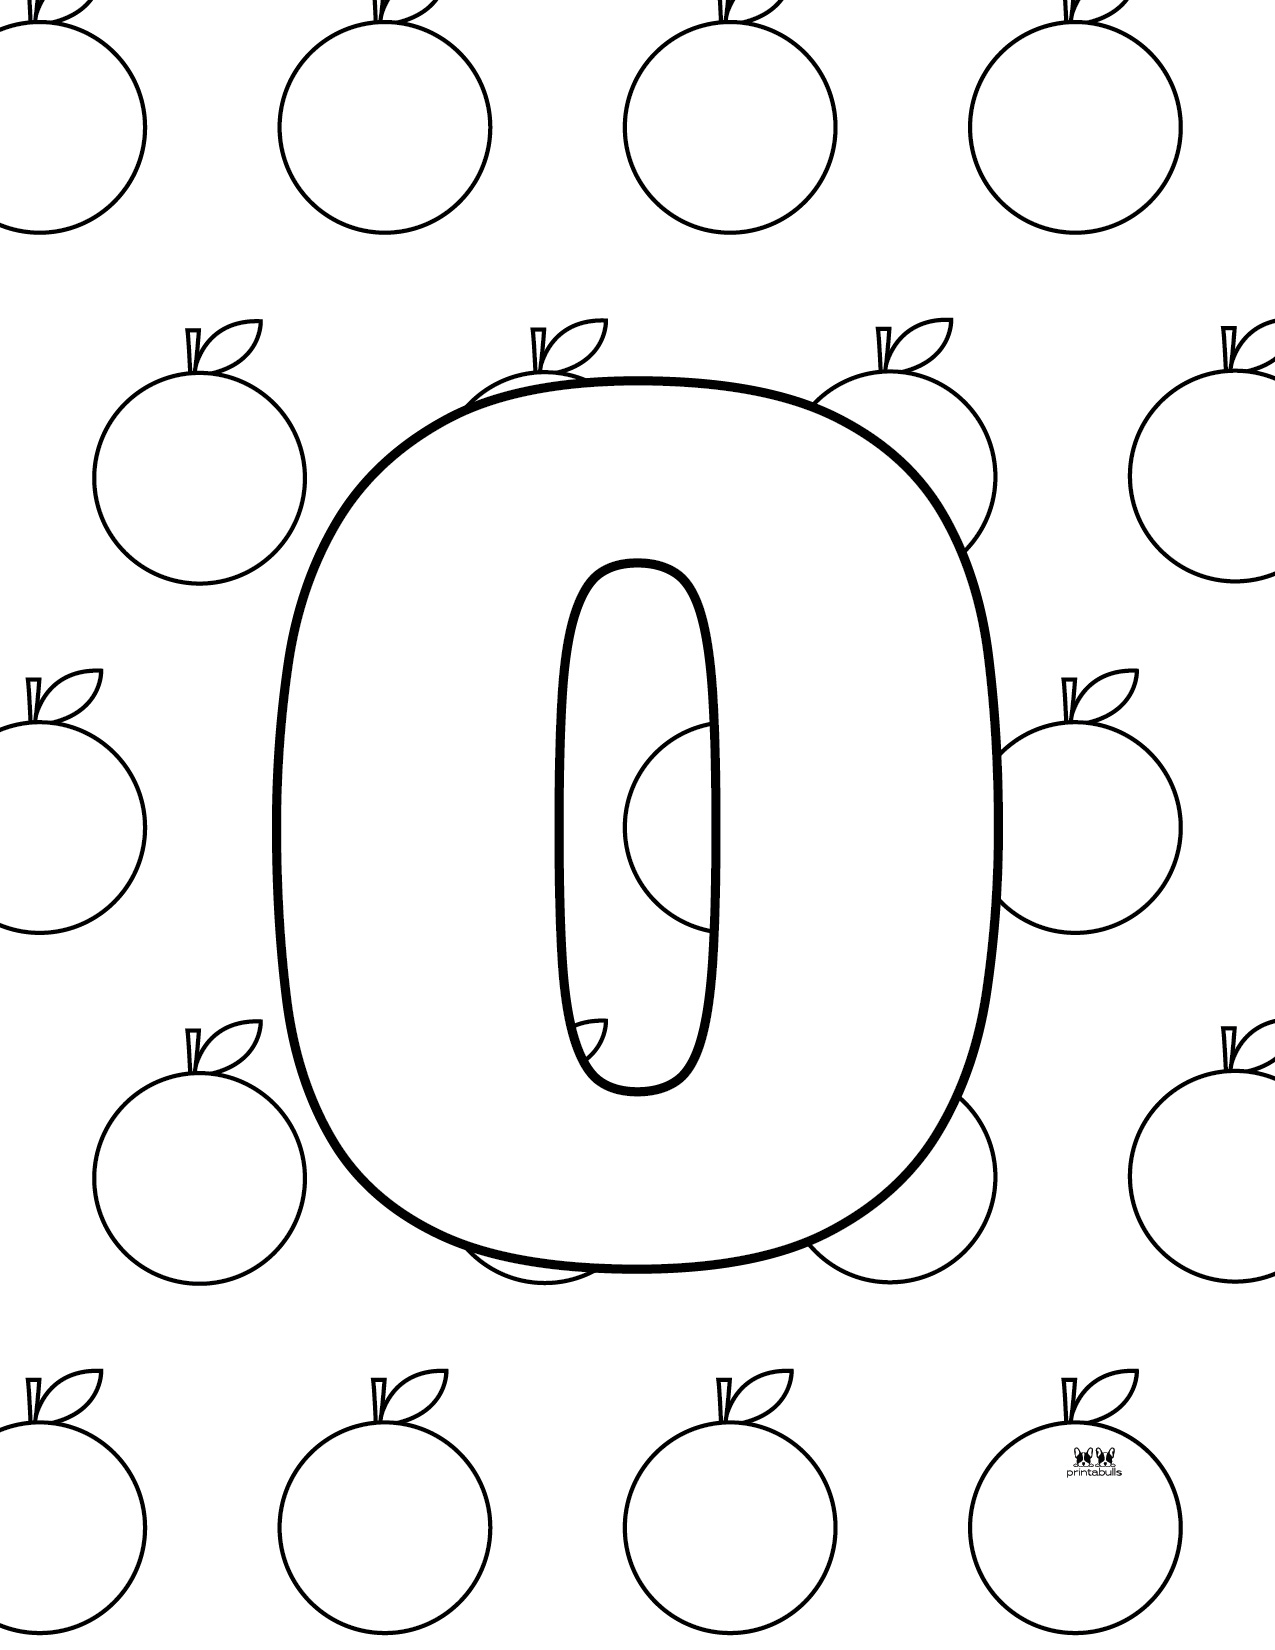 letter-o-coloring-pages-15-free-pages-printabulls